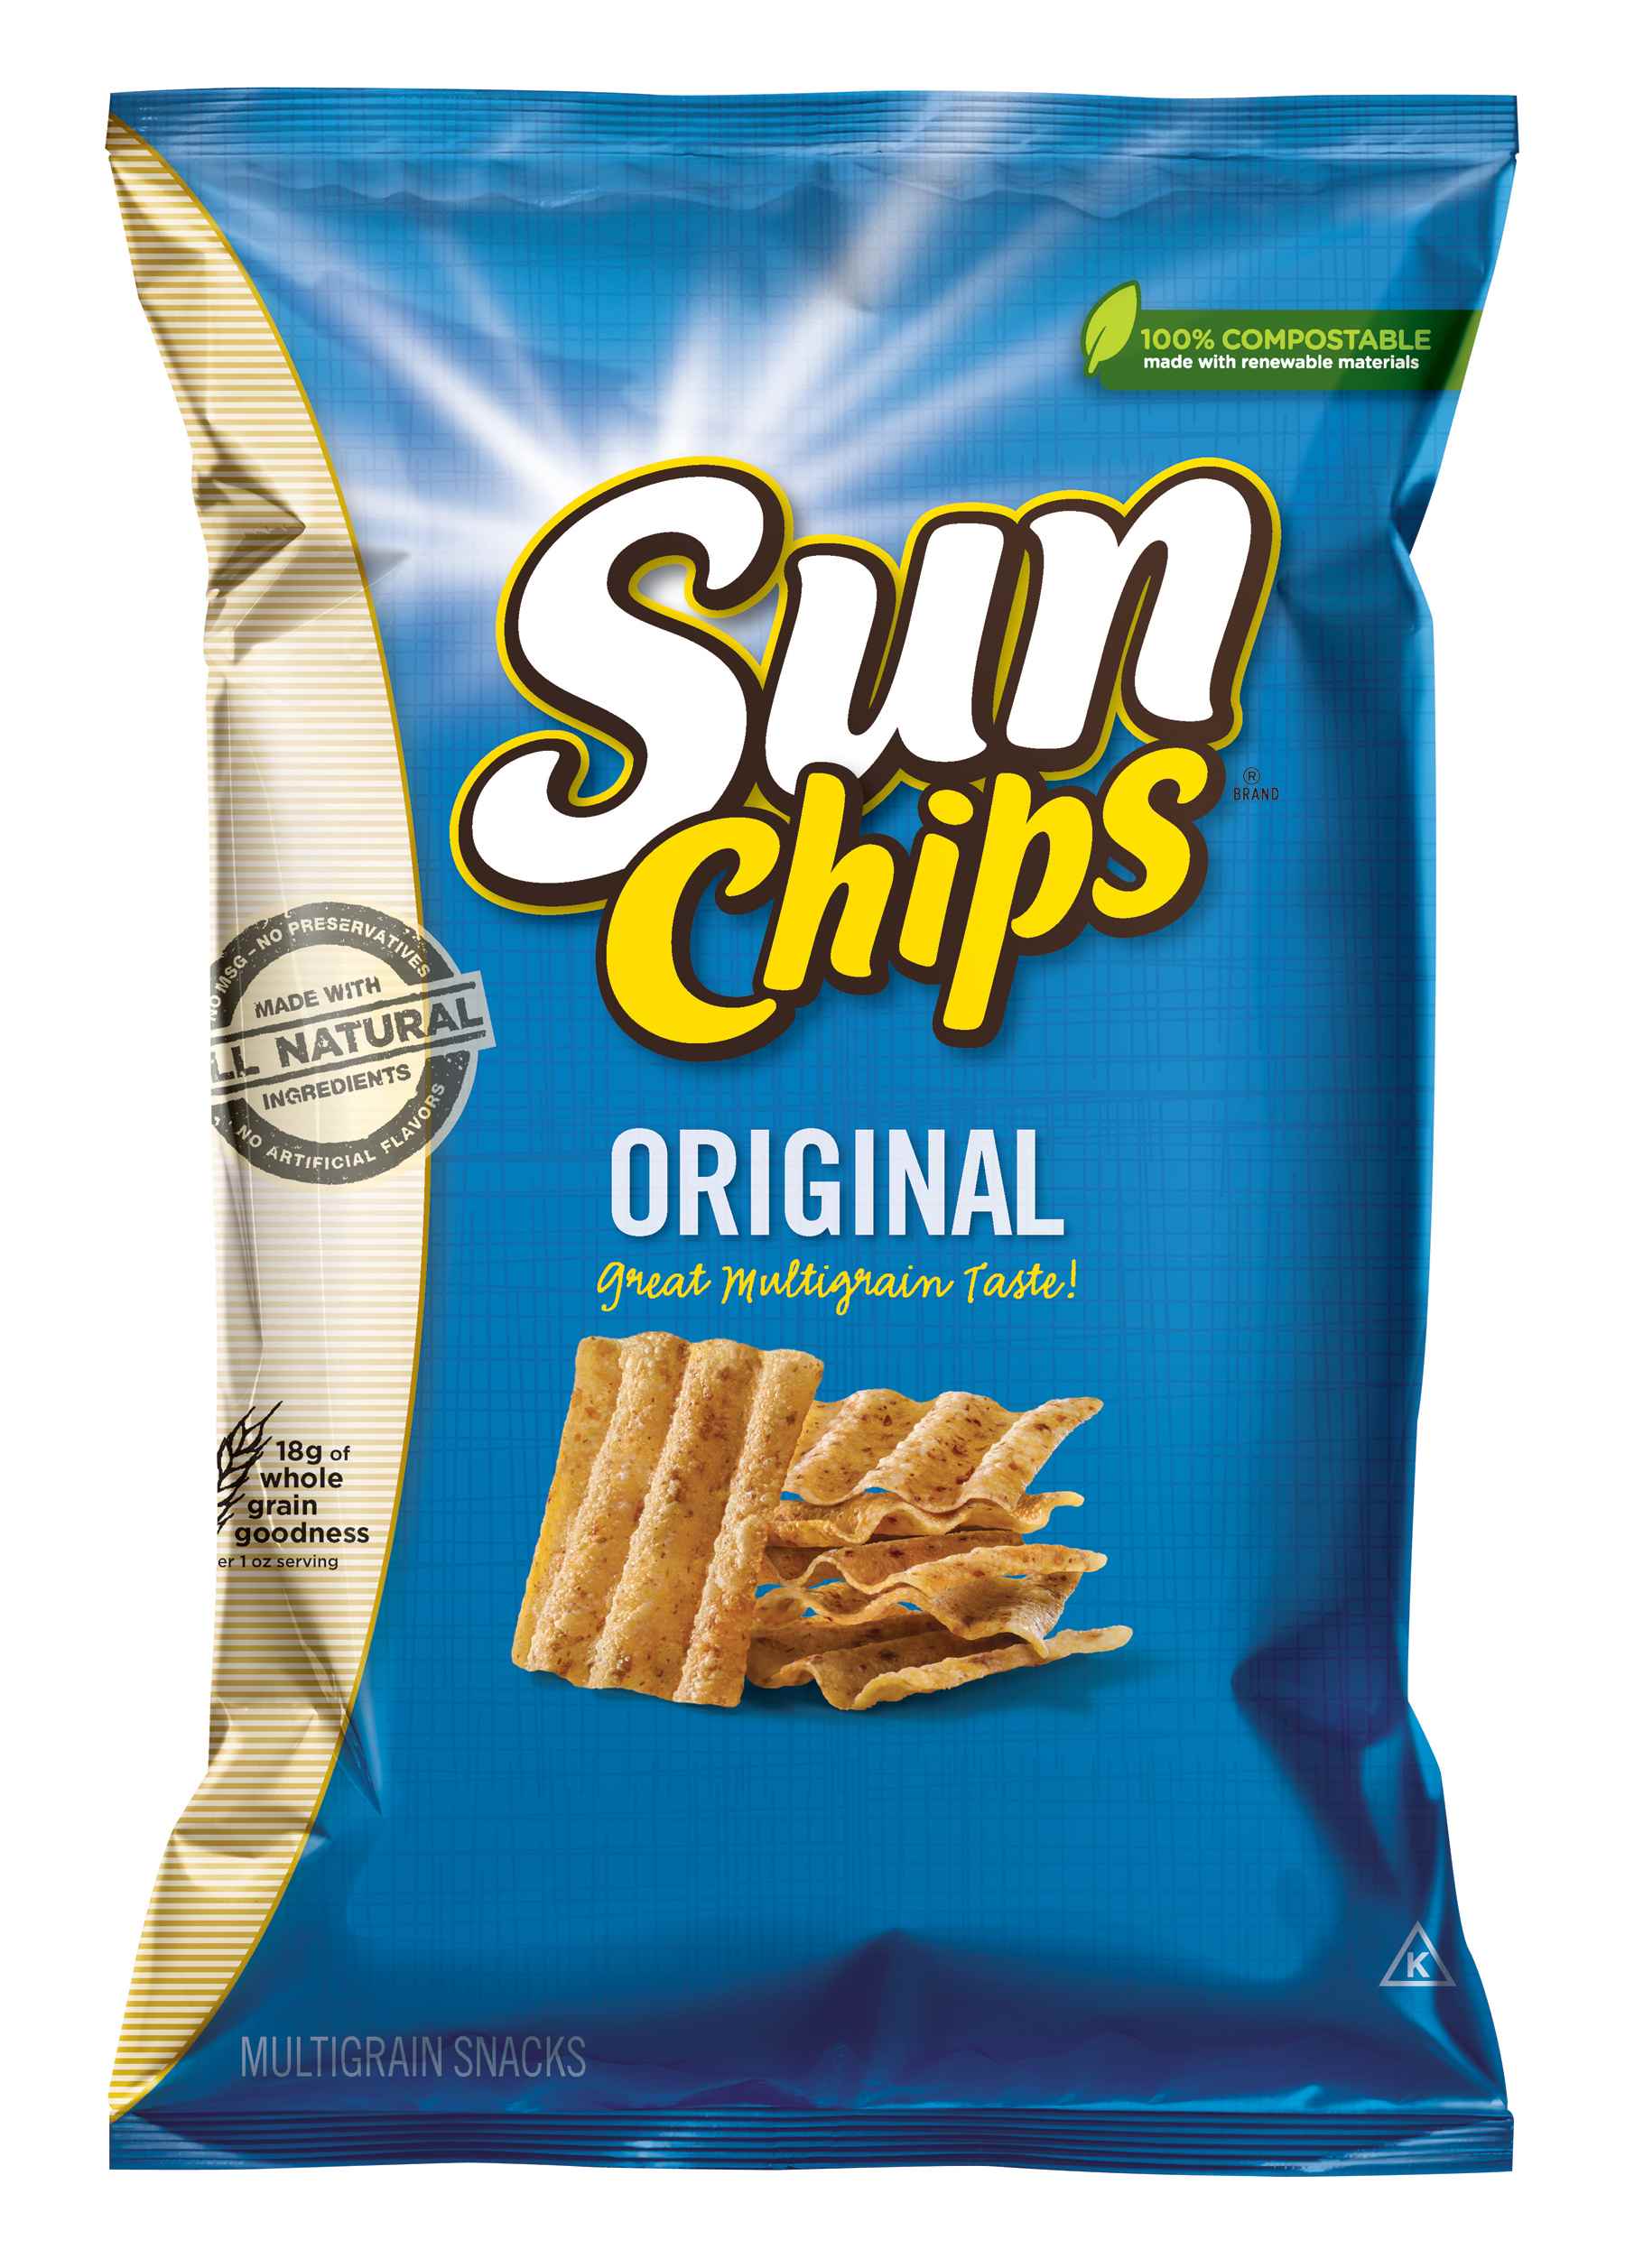 Sun Chips Logo - Sun Chips Claims To Be All Natural But The Truth Isn't So Sunny